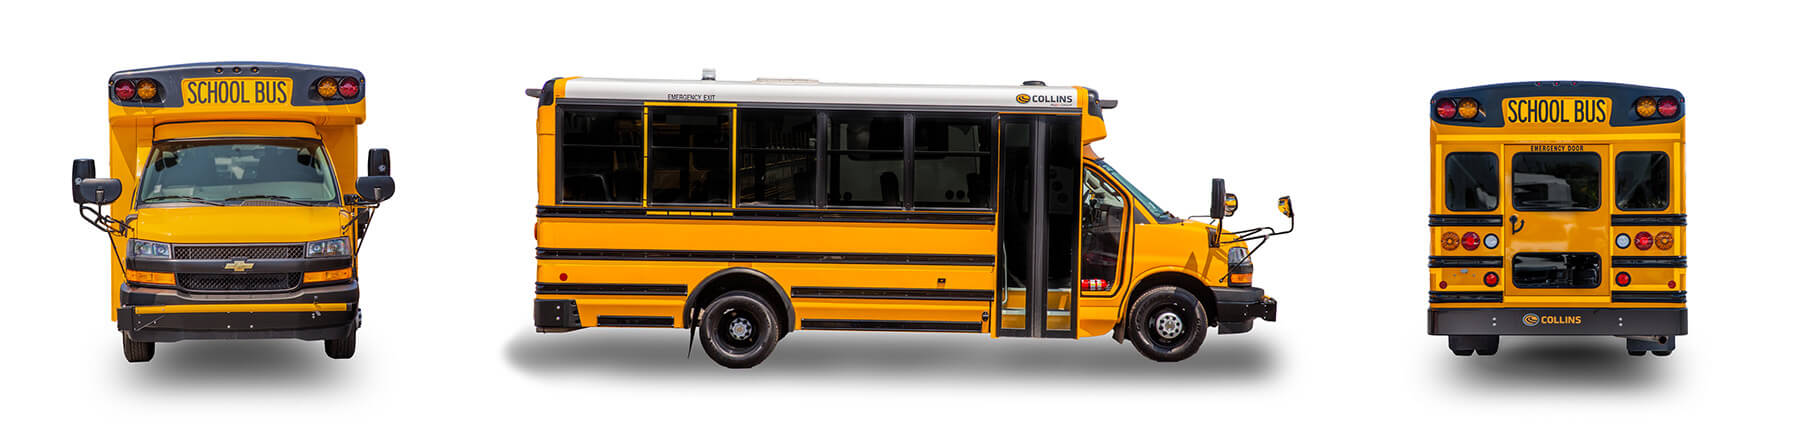 school buses for sale in alabama